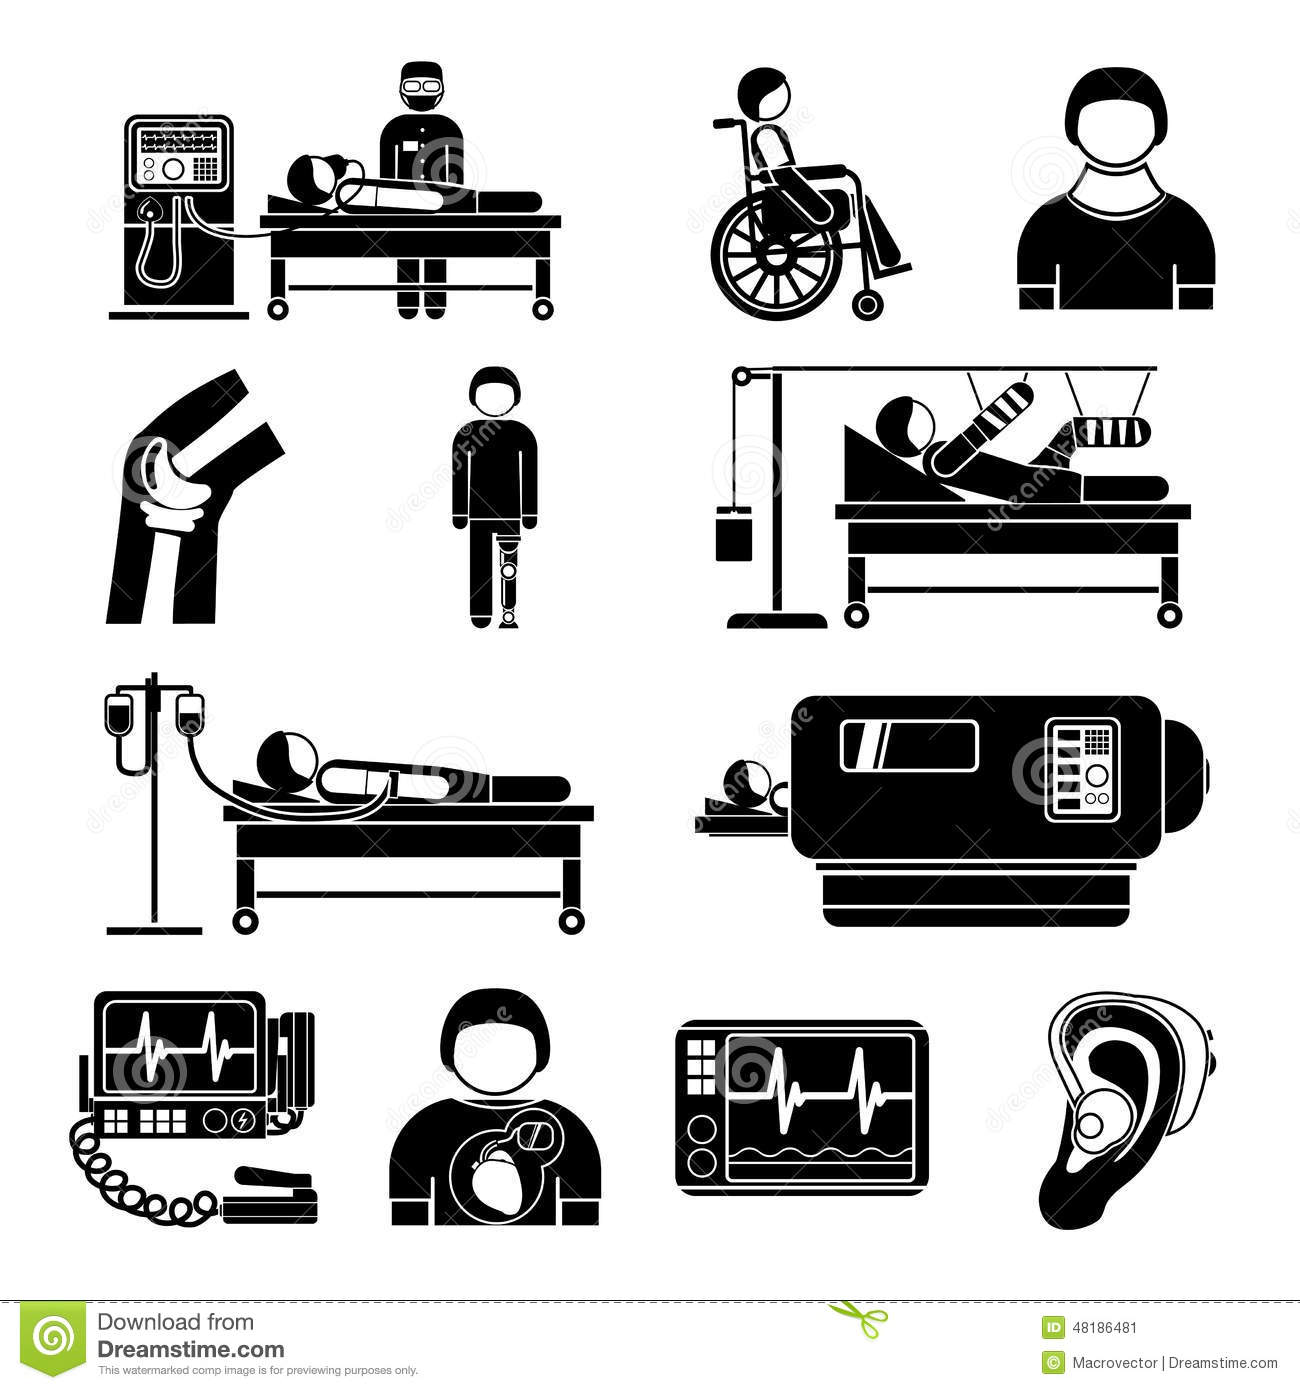 Life Support Equipments Cliparts Icons Stock Vector.